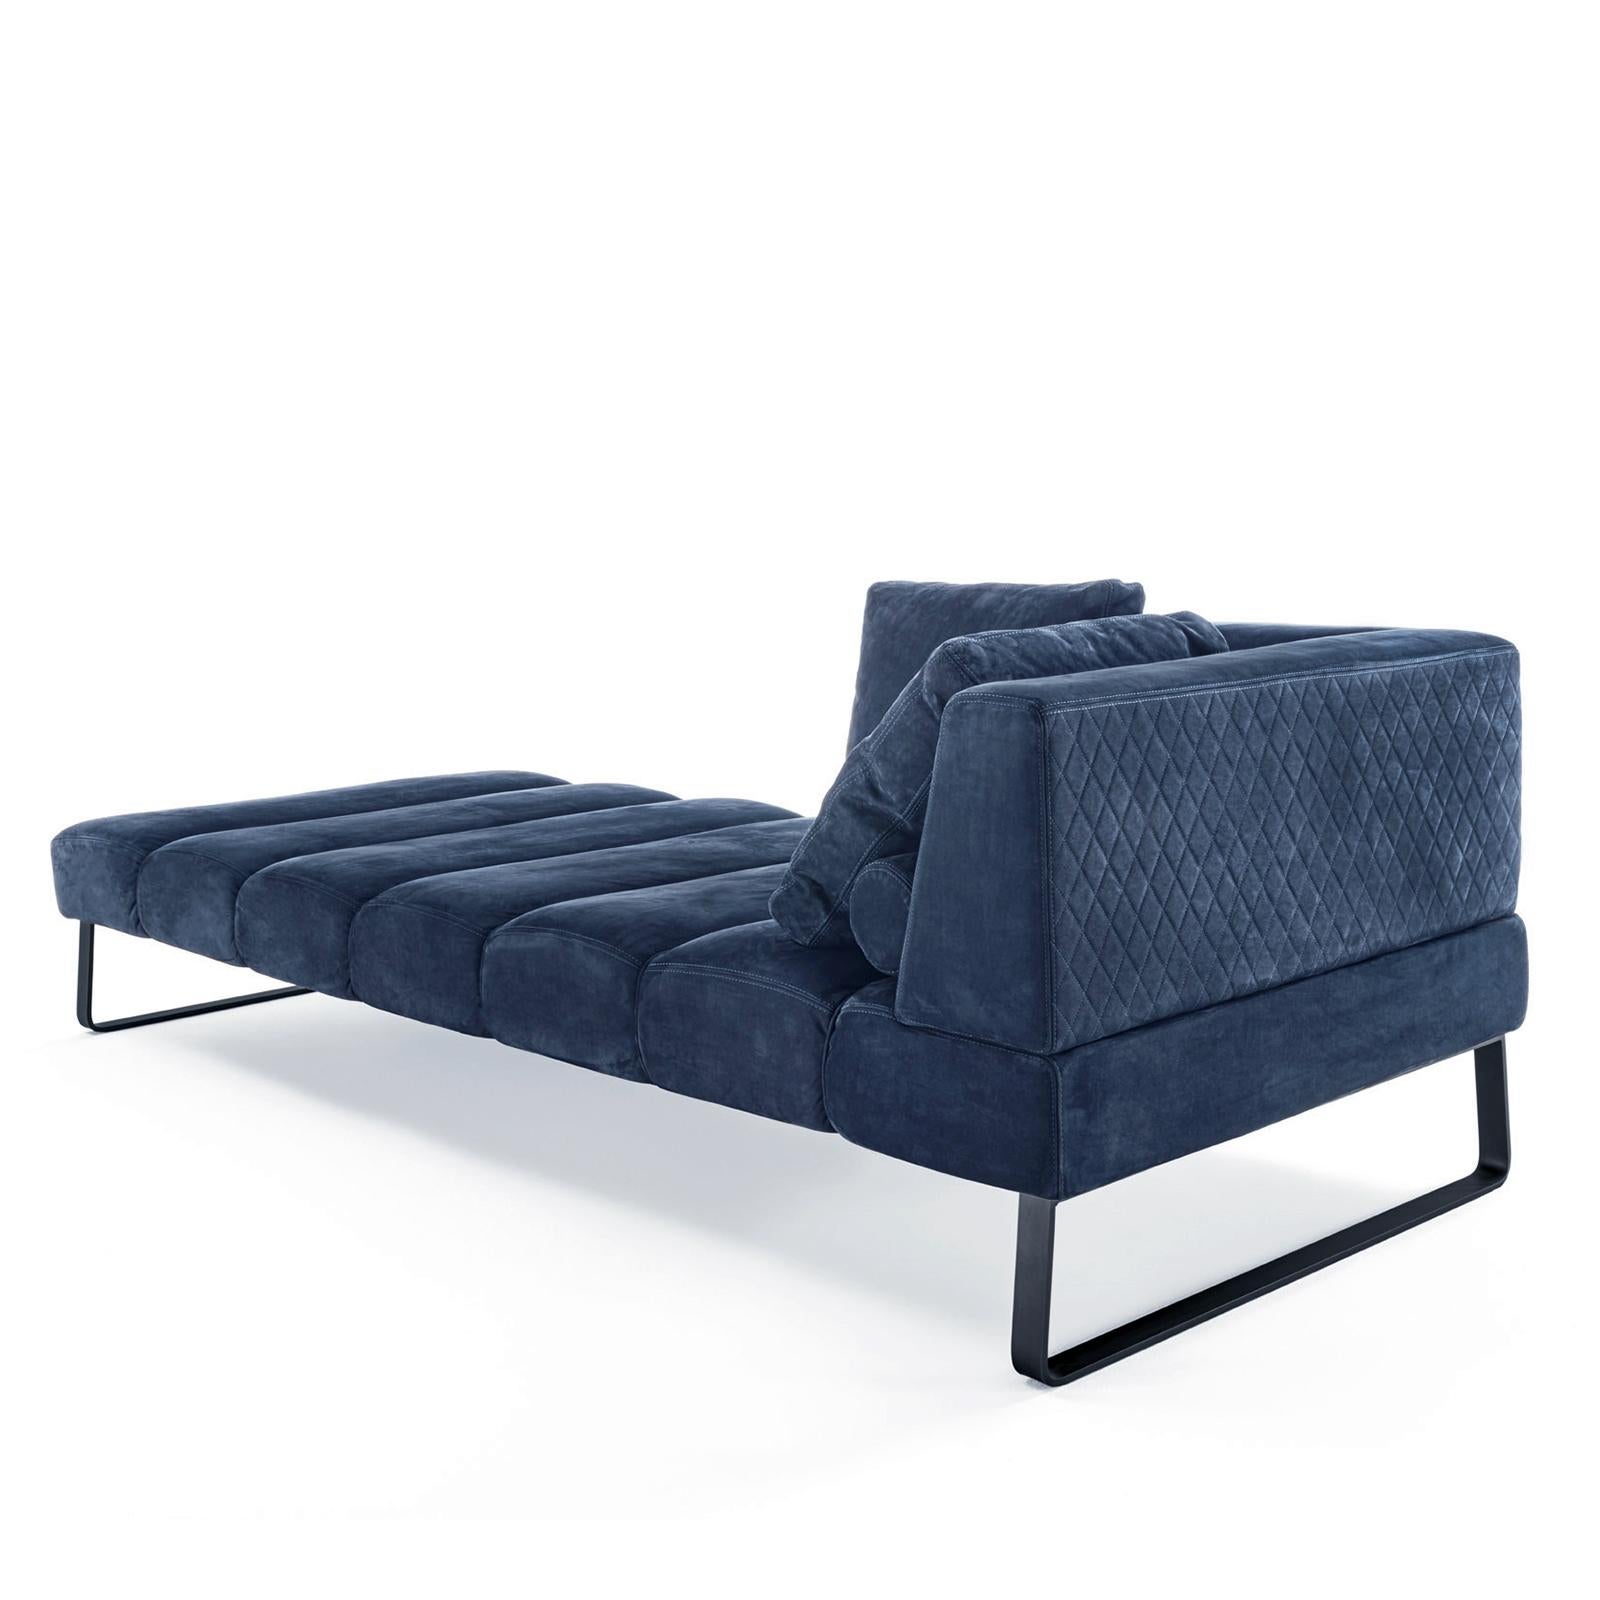 Sofa Saul Suede with solid wooden structure upholstered
and covered with blue suede leather. Cushion inluded, sofa
with iron lacquered feet base.
Also available with other fabrics or leathers, on request.